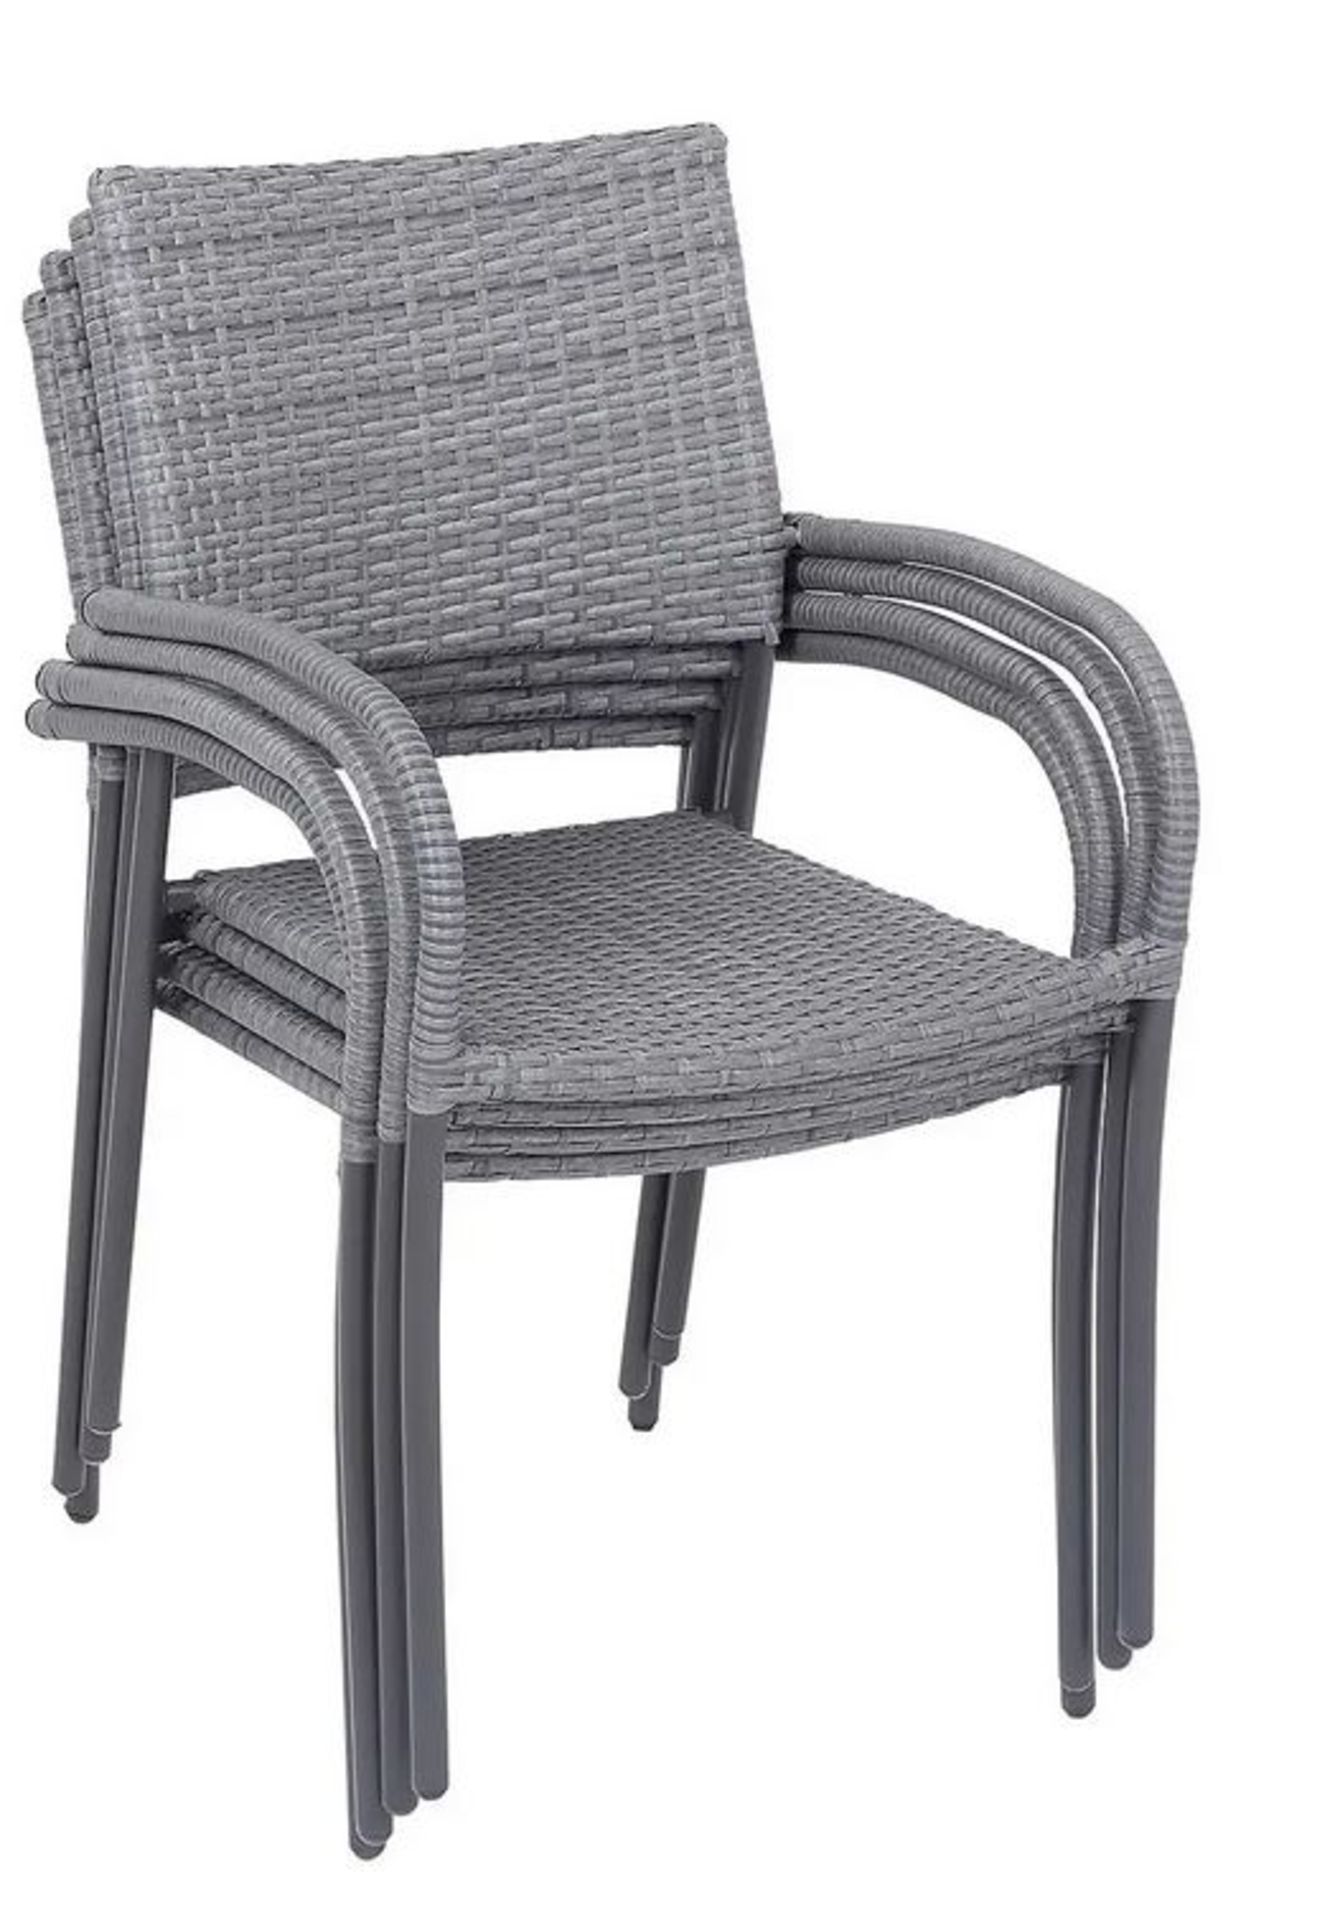 (1A) 4x Items. 3x Rattan Stackable Garden Chair. 1x Grey Faux Leather Chair. (All Items Appear Cle - Image 2 of 6